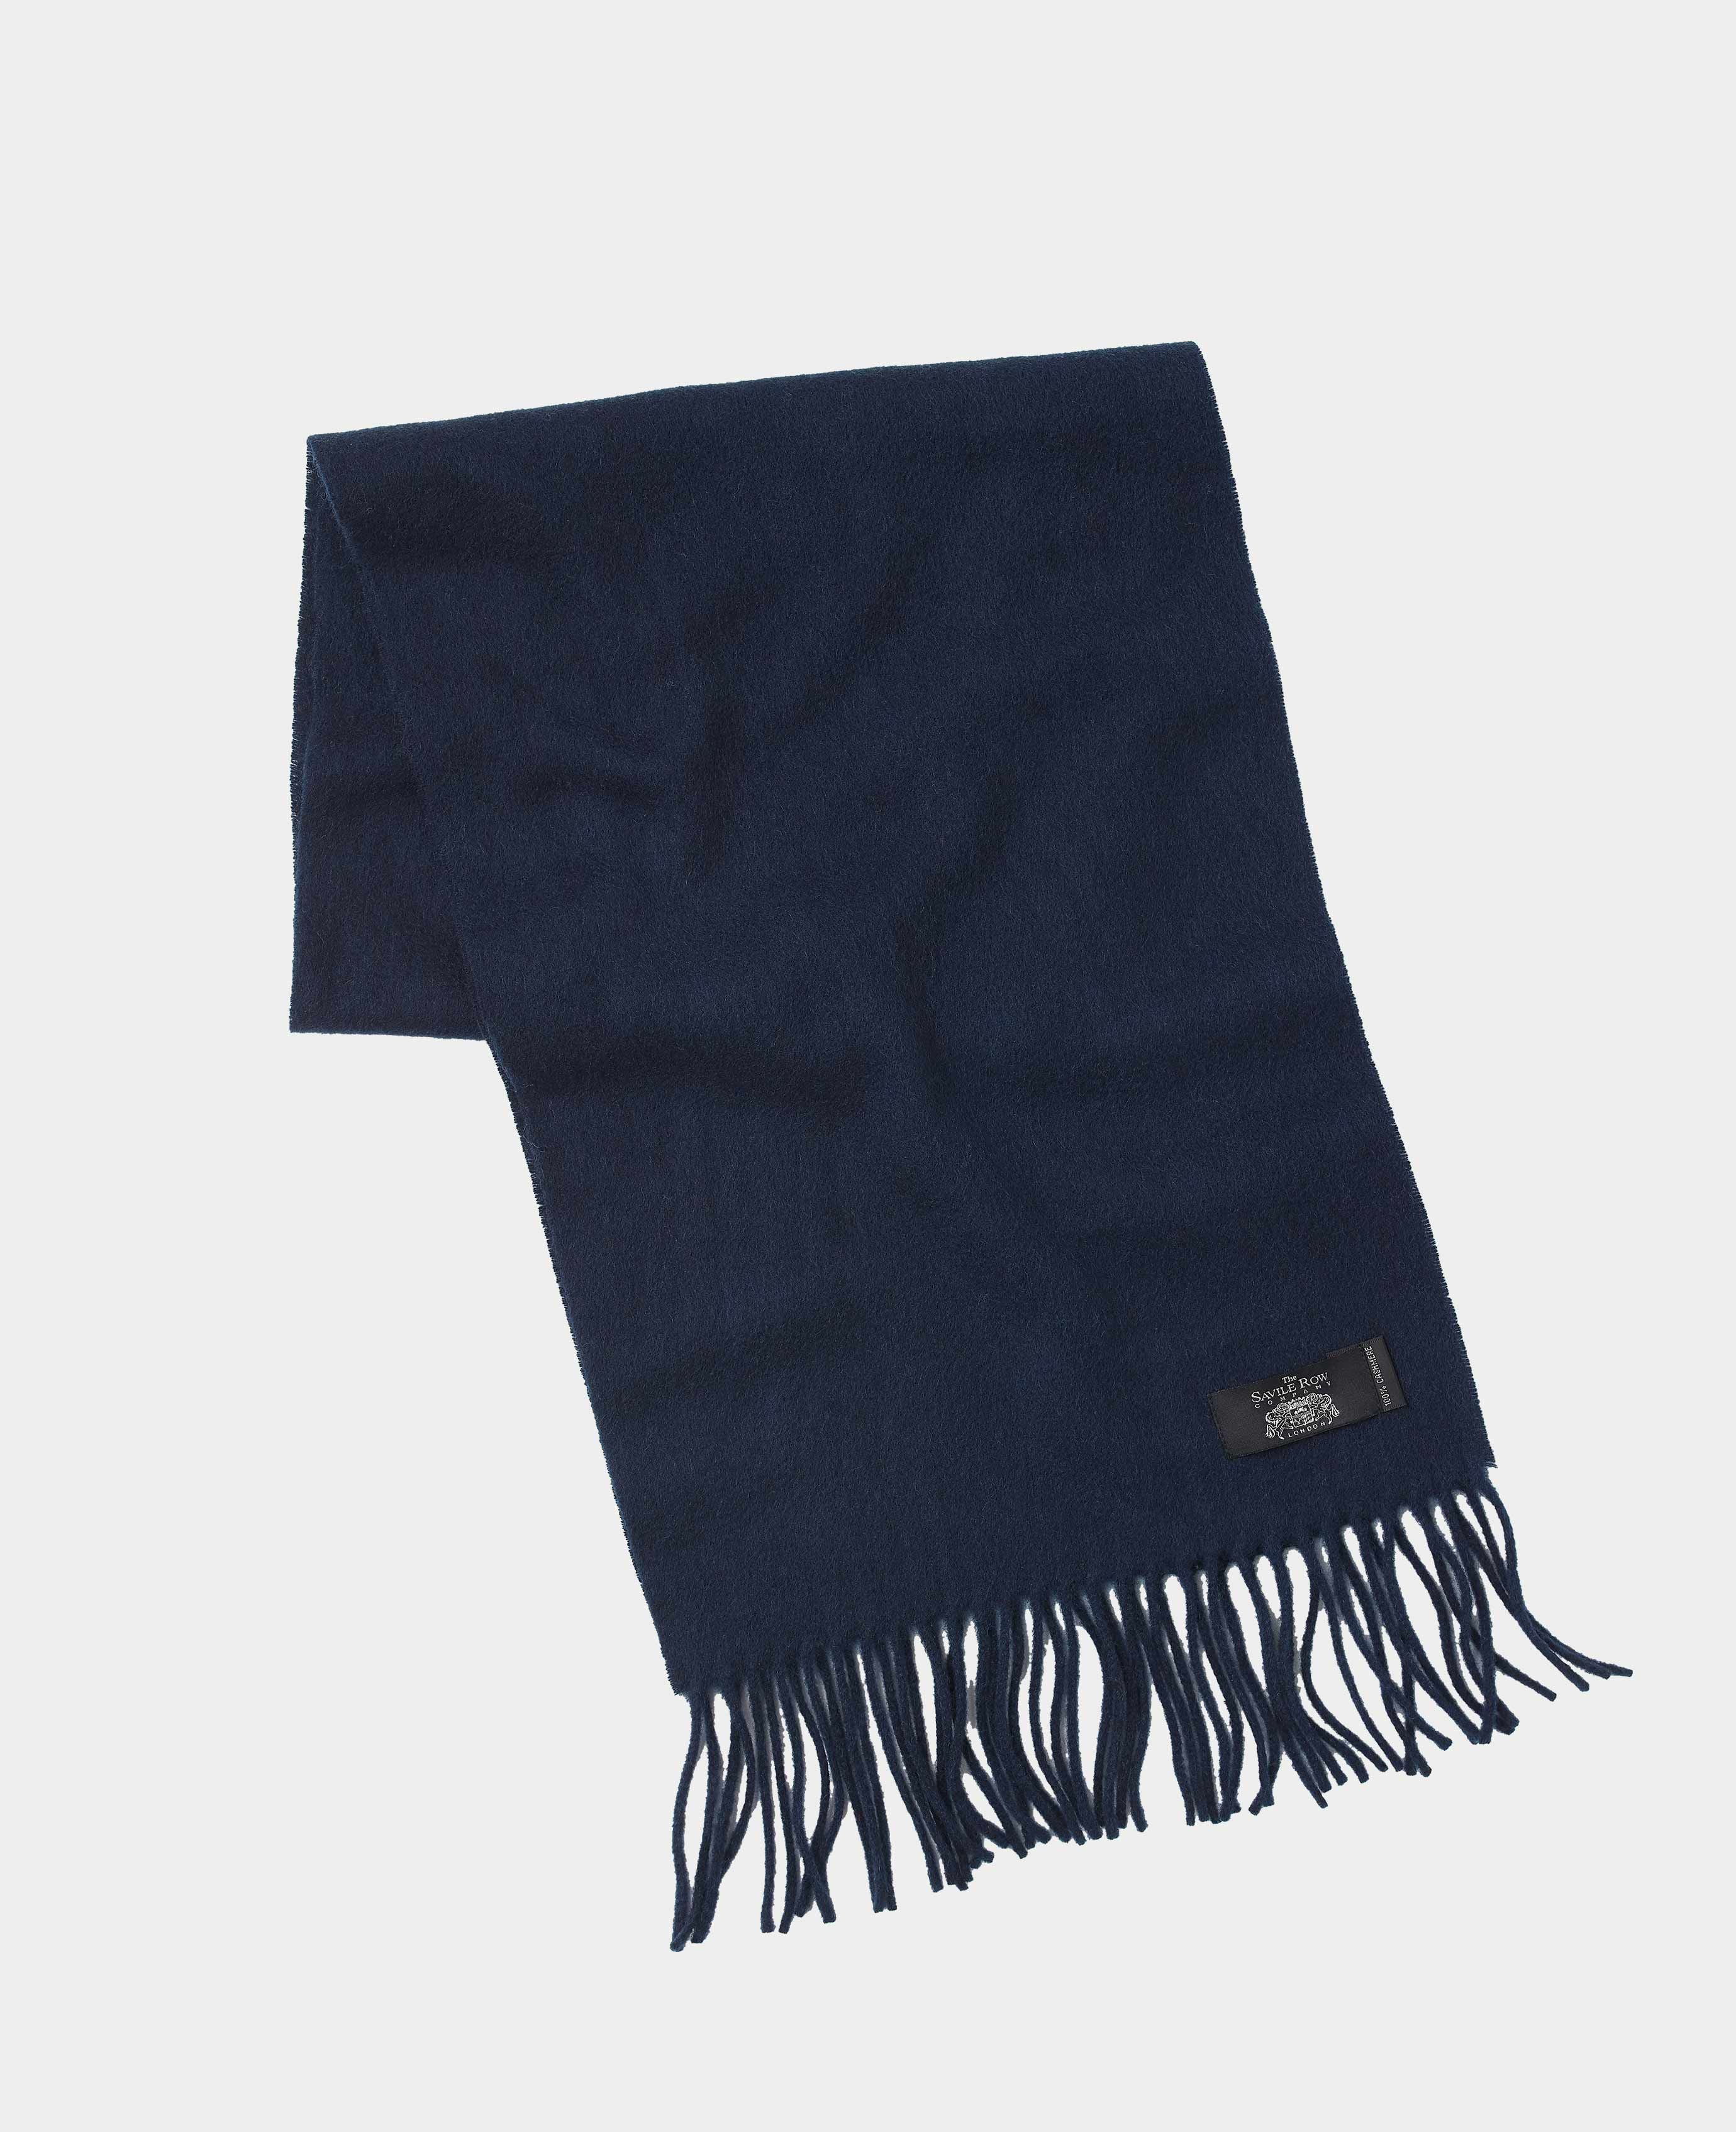 NWT Brioni 100% cashmere scarf stole Navy